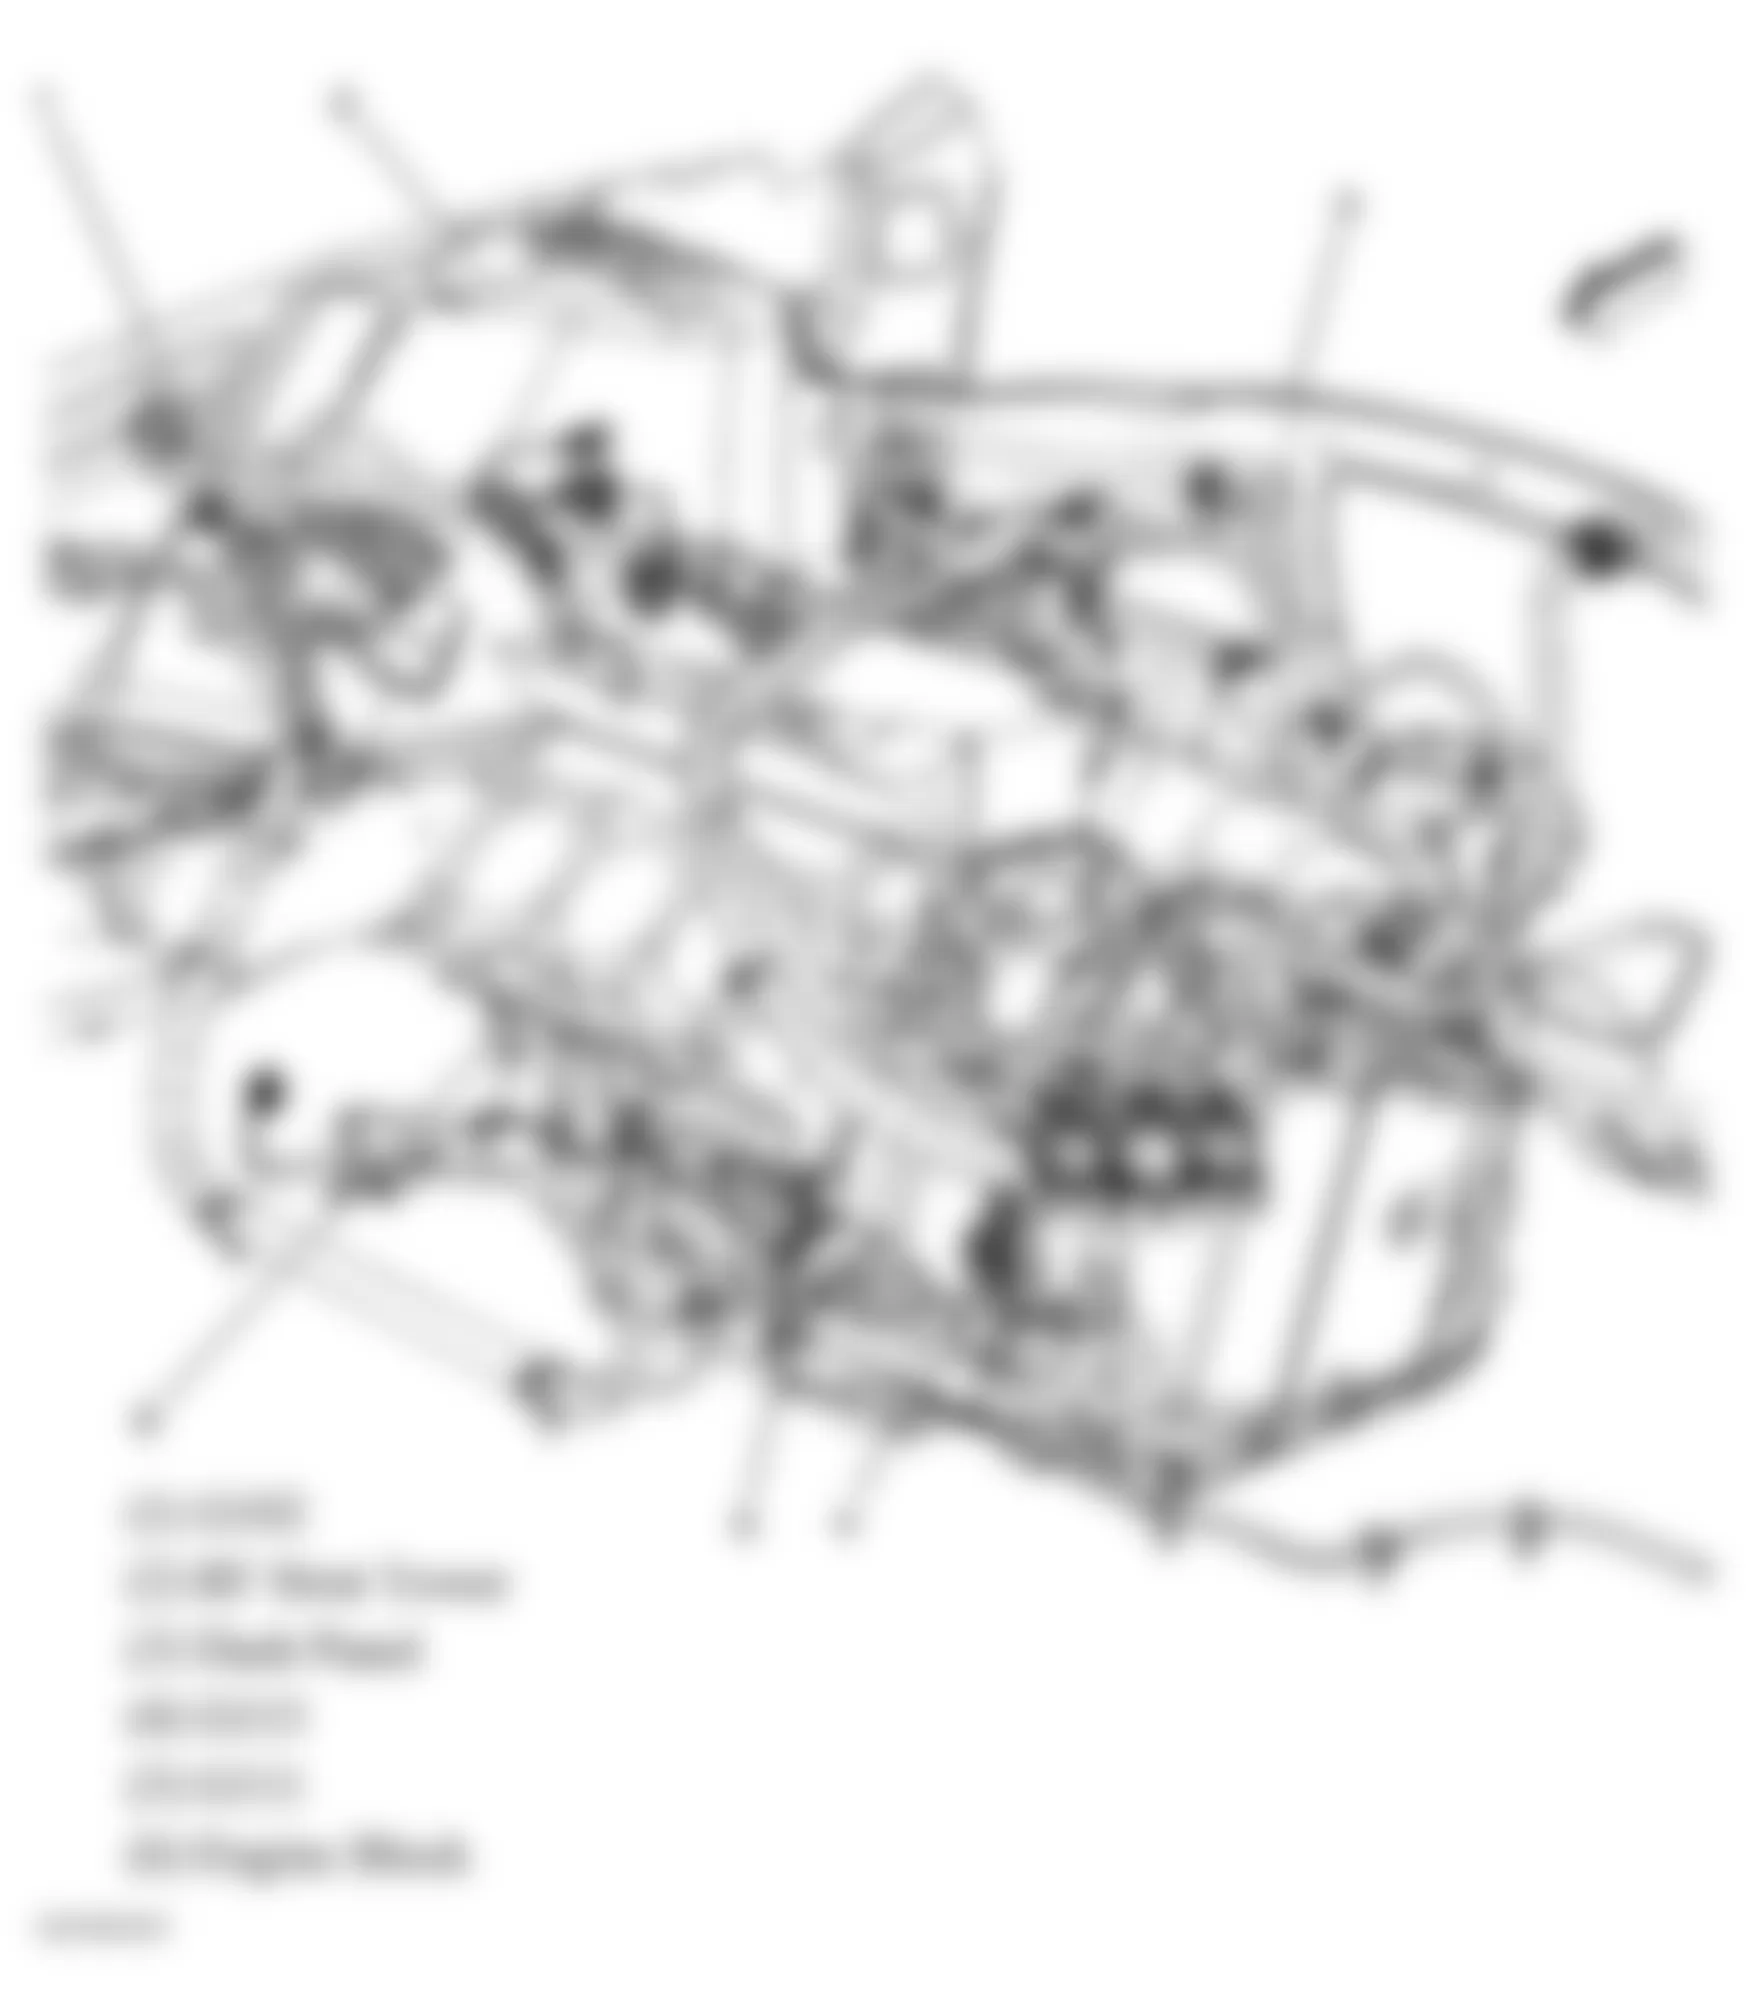 Buick LaCrosse CXL 2005 - Component Locations -  Engine/Transmission Assembly